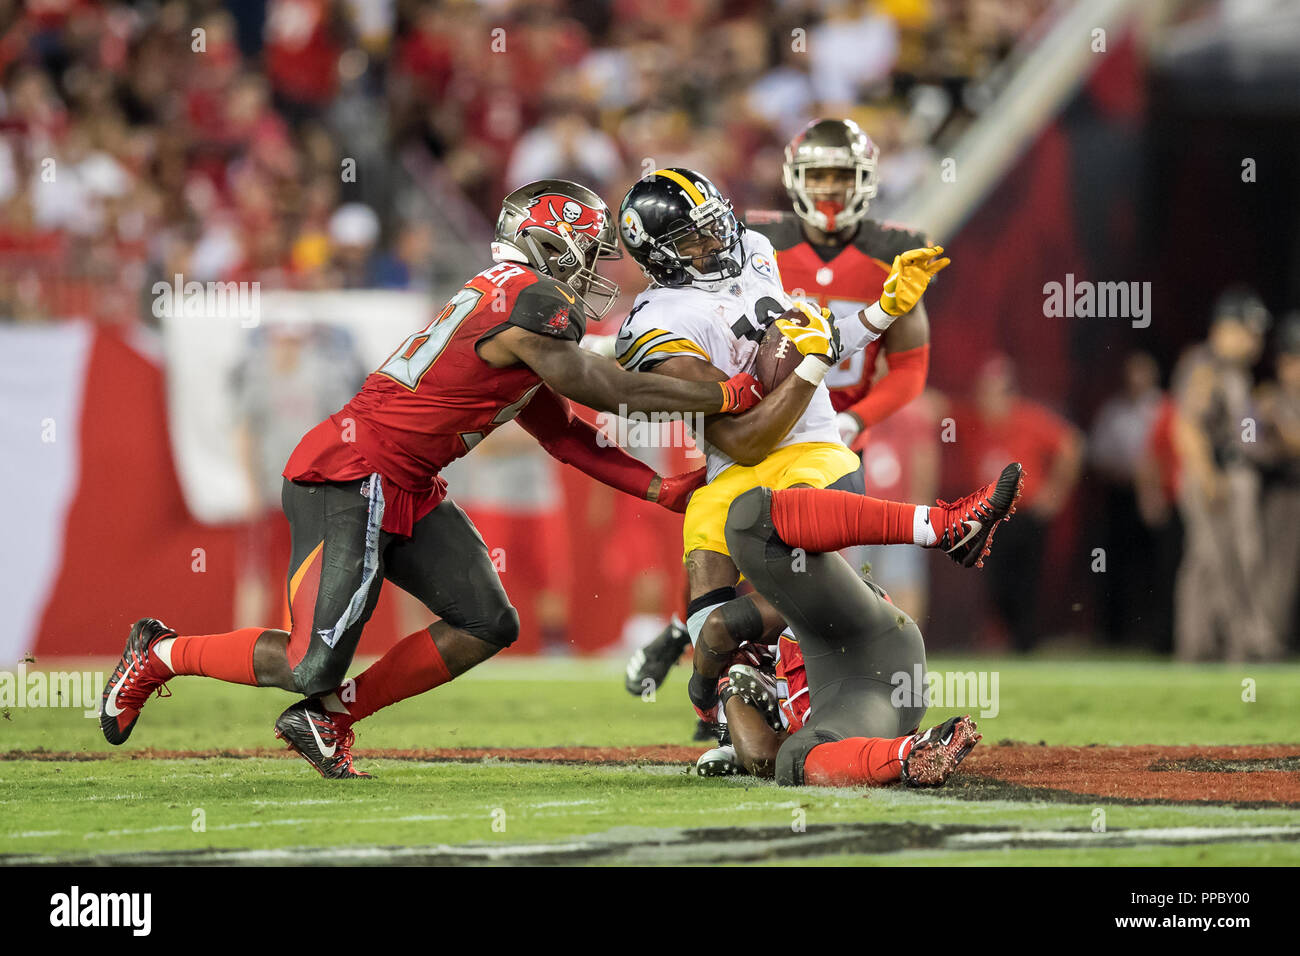 Tampa, Florida, USA. 24th Sep, 2018. Pittsburgh Steelers running back James Conner (30) is brought down by Tampa Bay Buccaneers linebacker Lavonte David (54) during the game at Raymond James Stadium on Monday September 24, 2018 in Tampa, Florida. Credit: Travis Pendergrass/ZUMA Wire/Alamy Live News Stock Photo